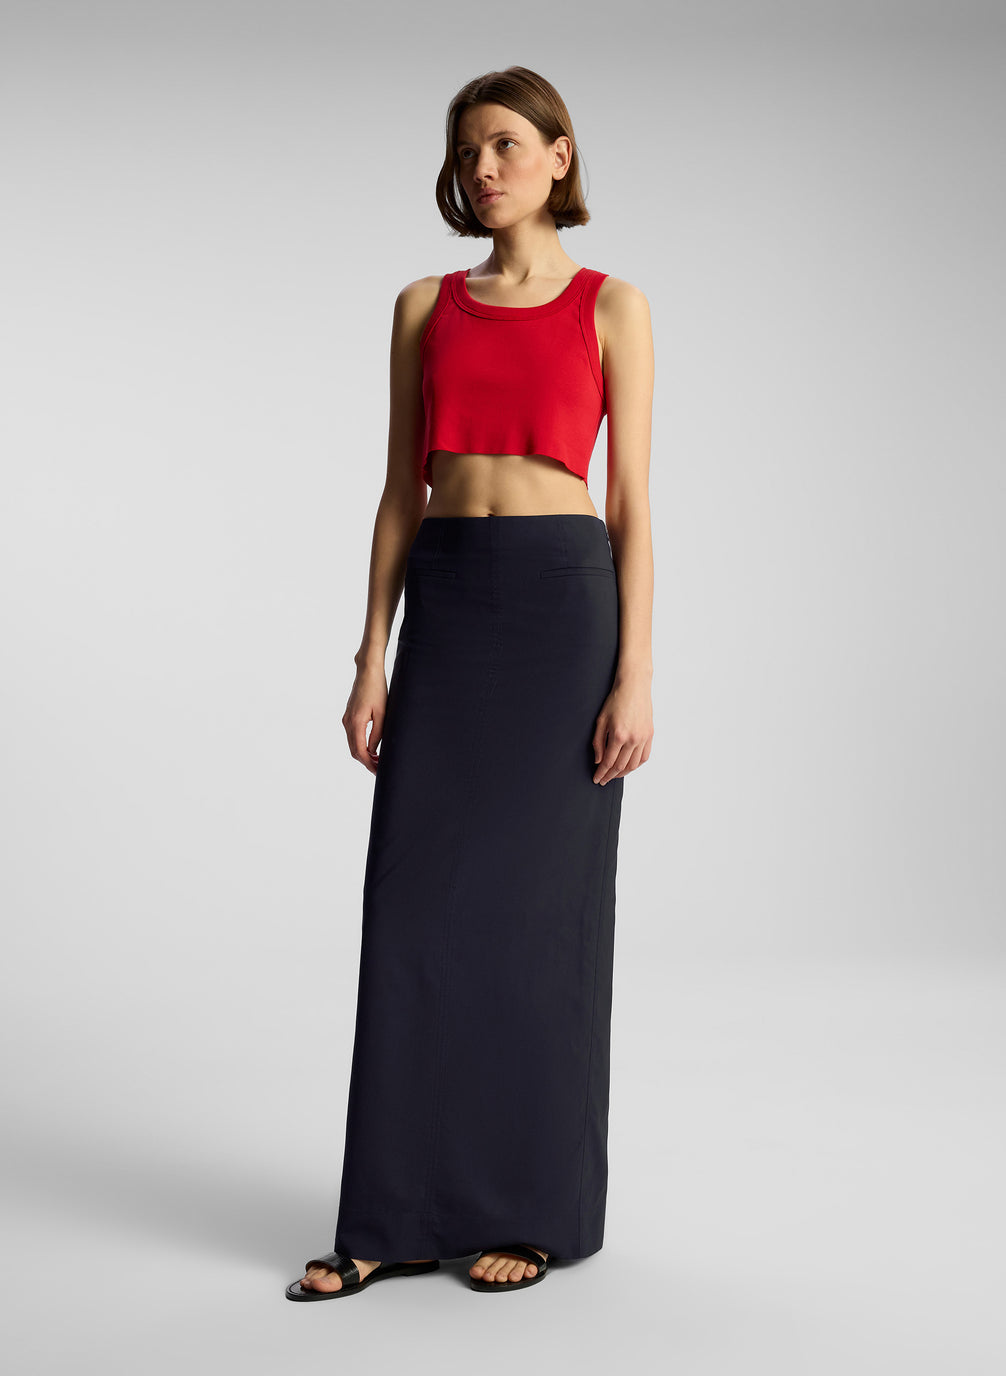 side view of woman wearing red cropped tank top and nay blue maxi skirt